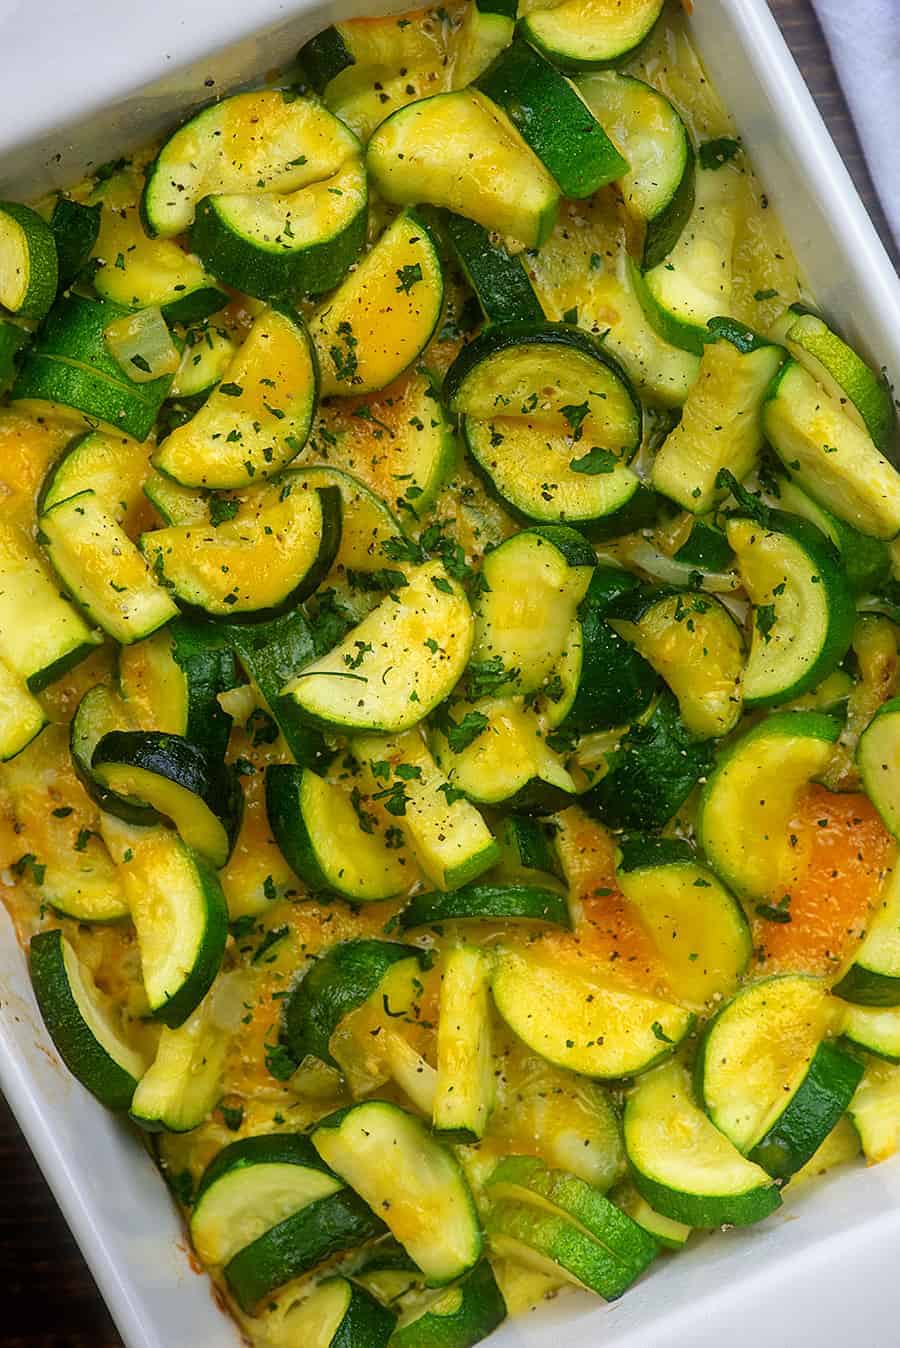 zucchini pieces in a white baking pan